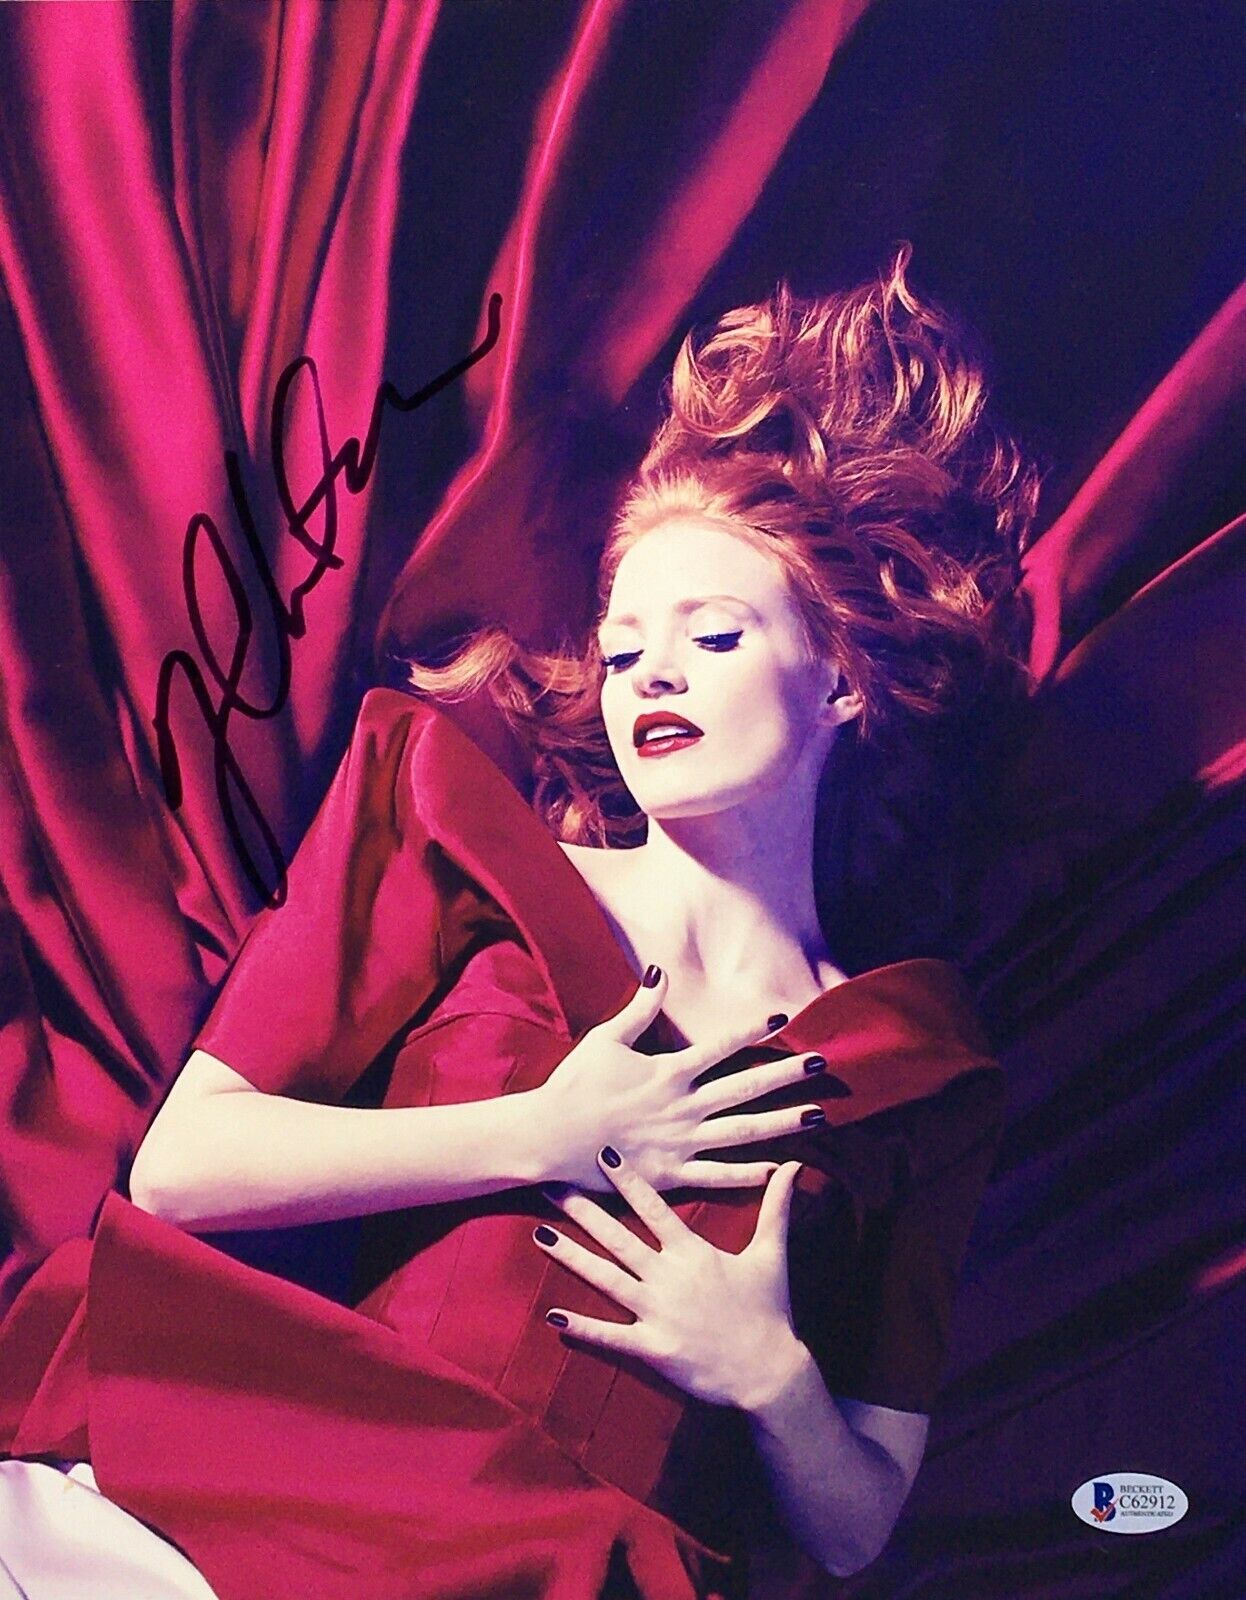 Jessica Chastain Signed 11x14 Photo Poster painting *Actress *Model BAS C62912